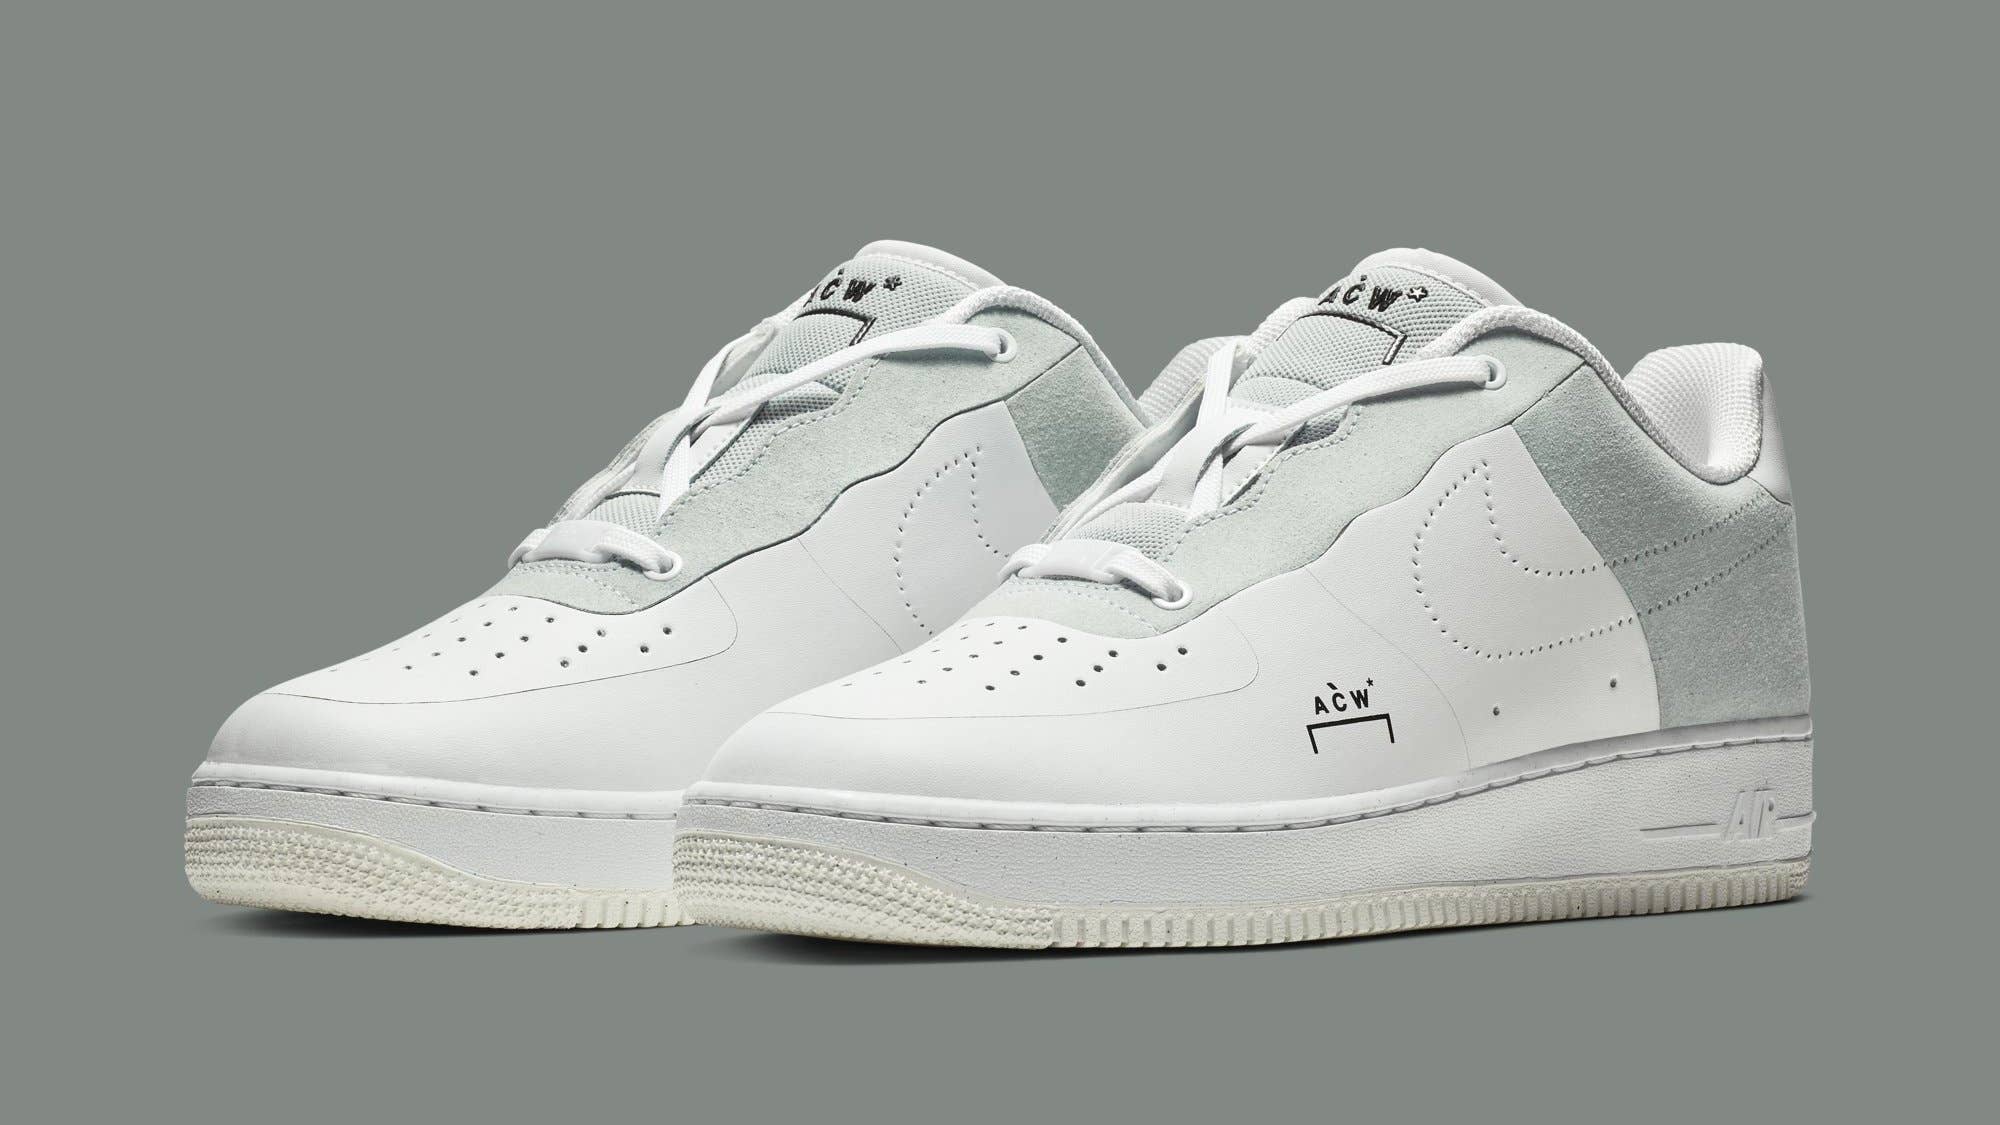 Misverstand Succesvol Ambtenaren A-Cold-Wall's Air Force 1 Collab Is Crafted With Flyleather | Complex